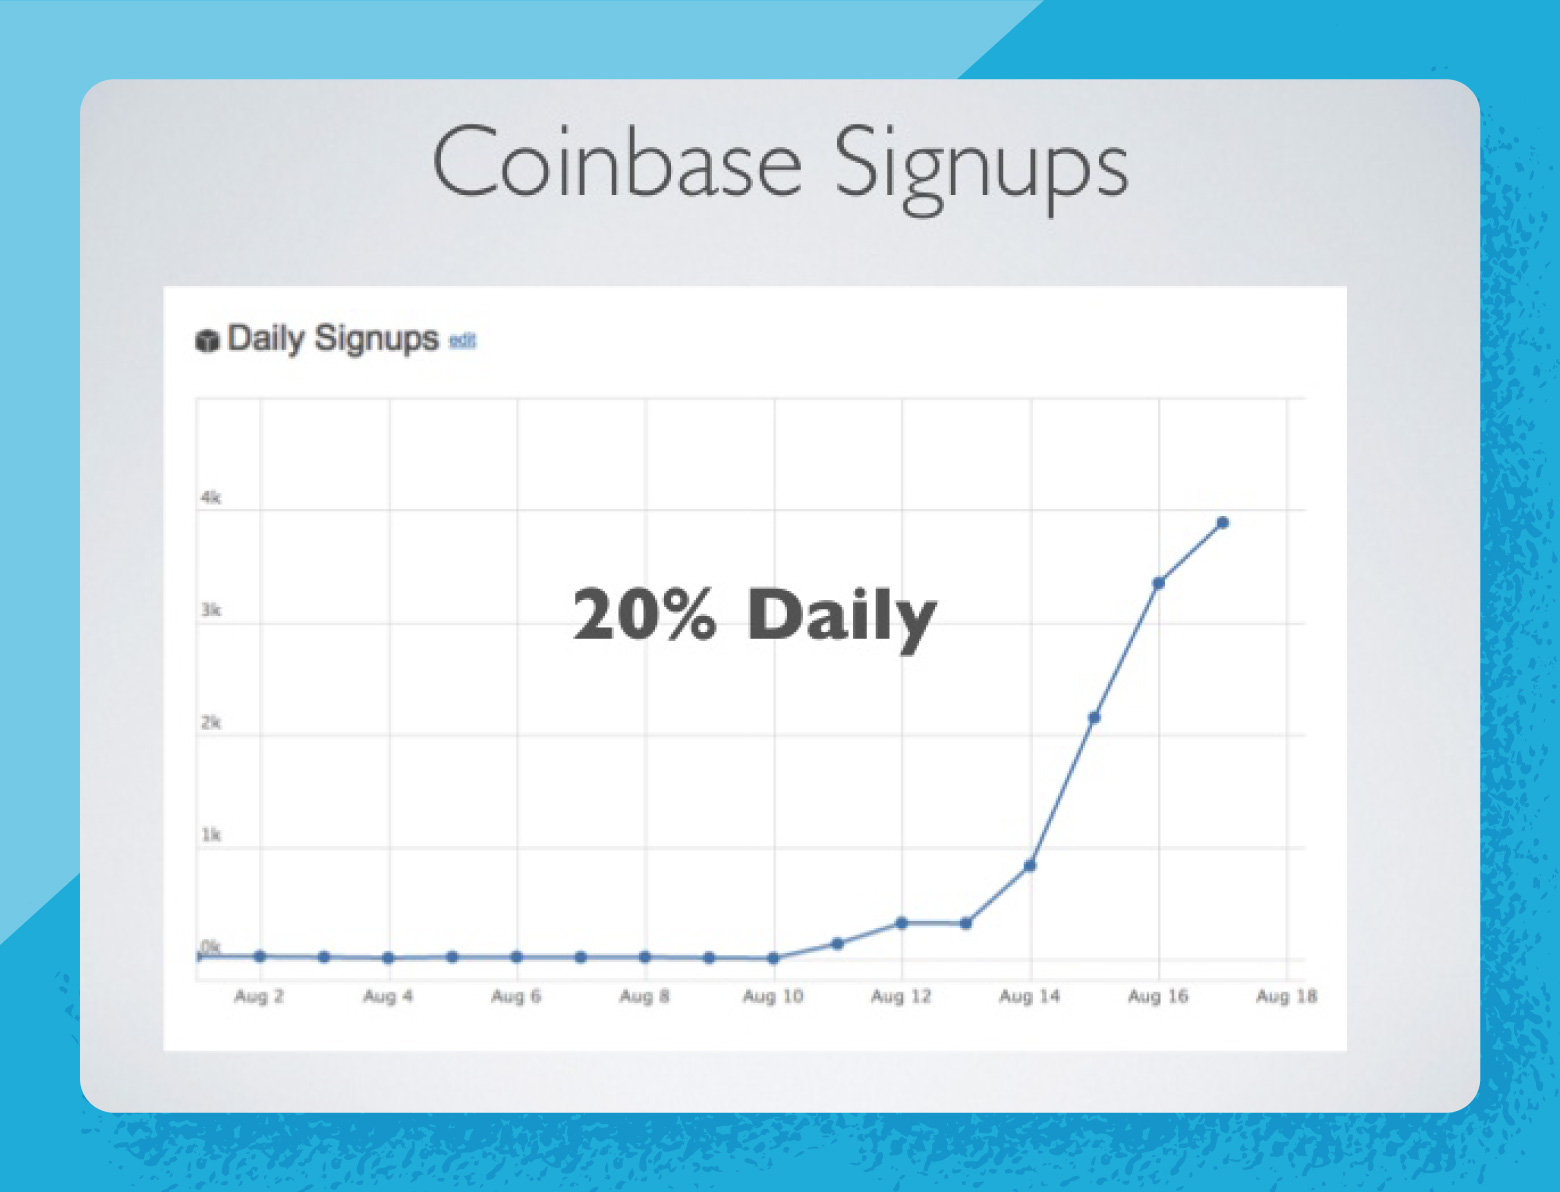 Slide from the Coinbase pitch deck with clear graph of daily signup growth